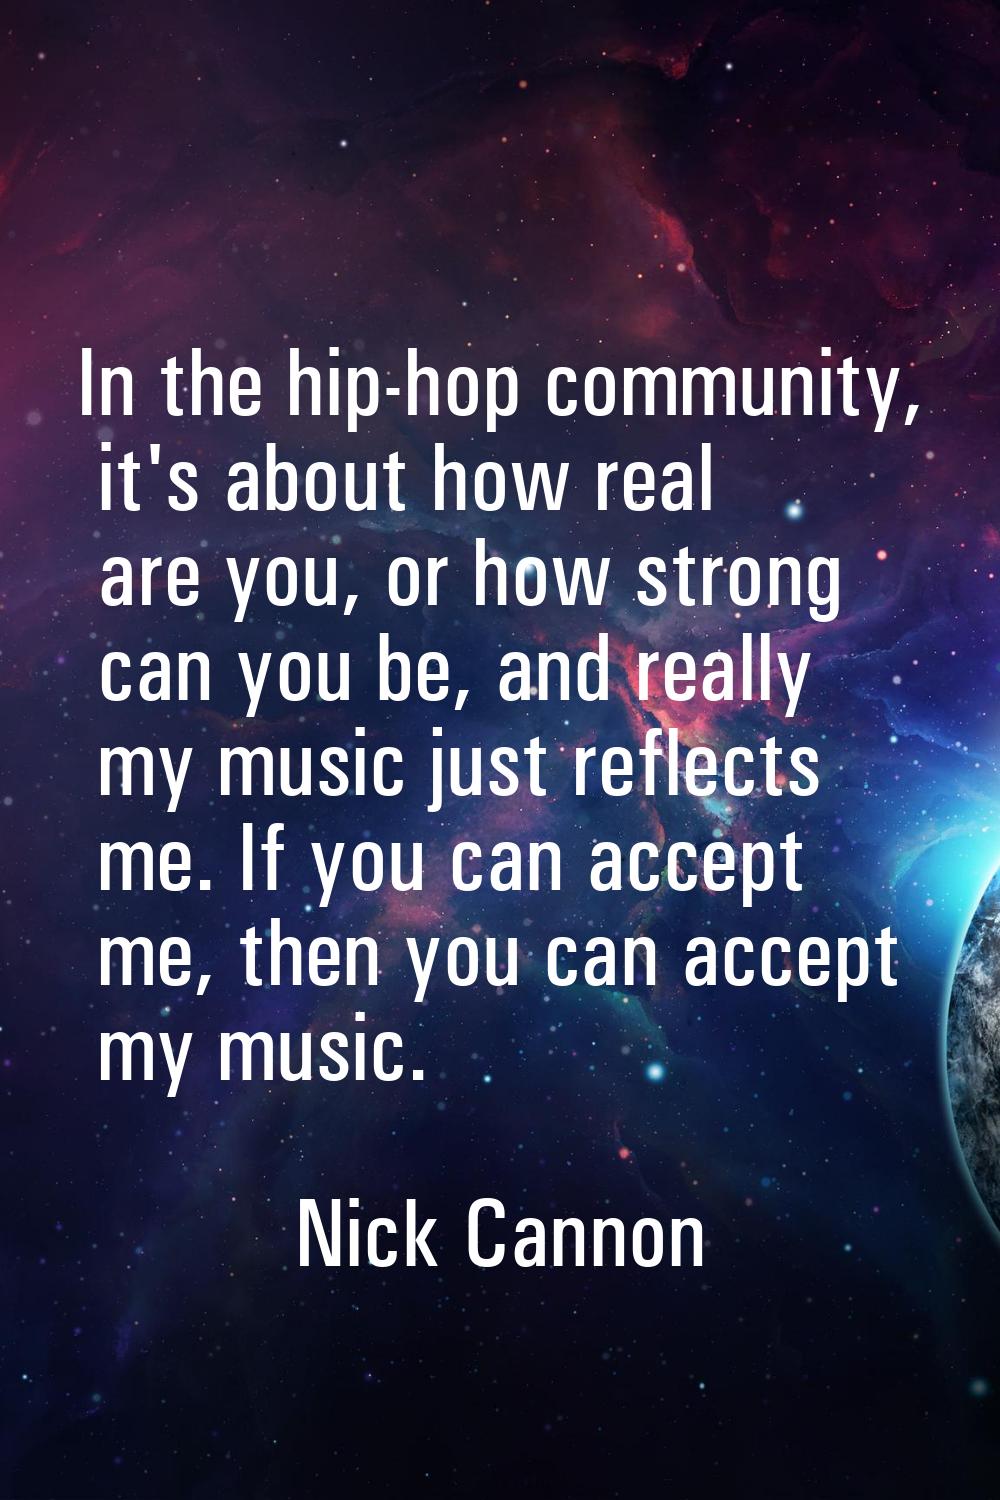 In the hip-hop community, it's about how real are you, or how strong can you be, and really my musi